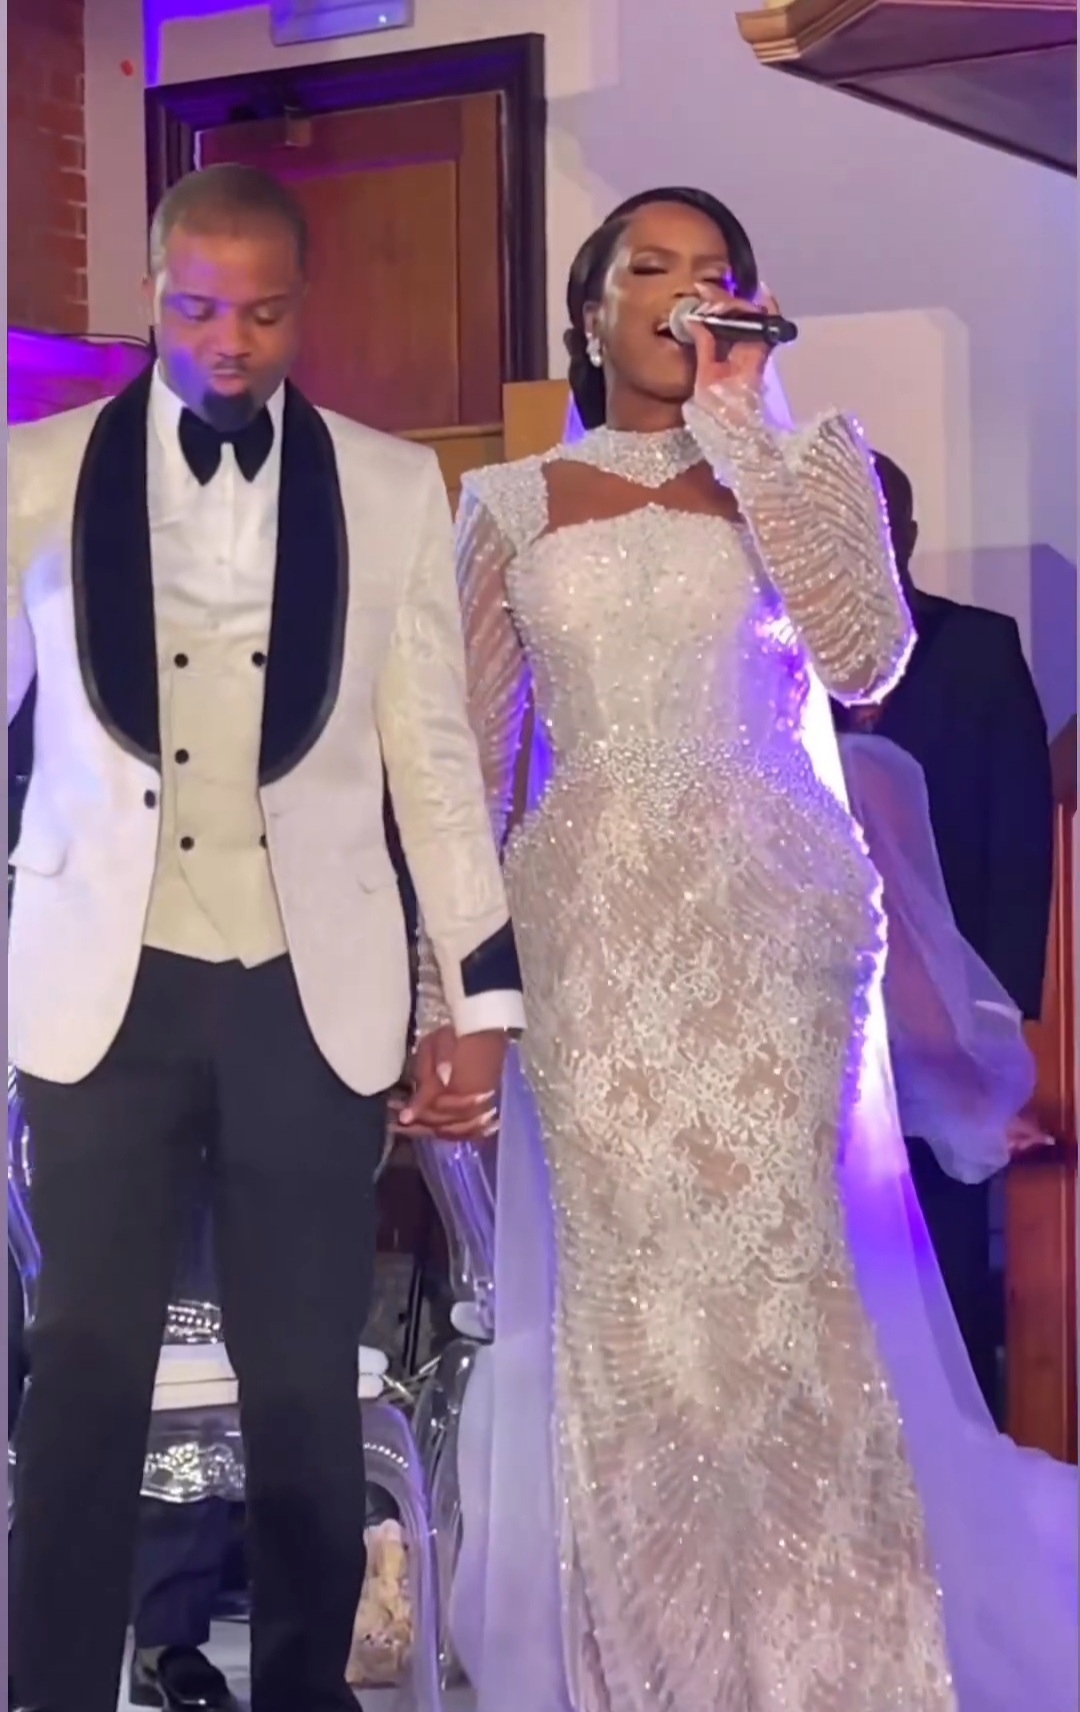 When The Bride is a Worship Chief! This Bride Singing Will Completely Make Your Day